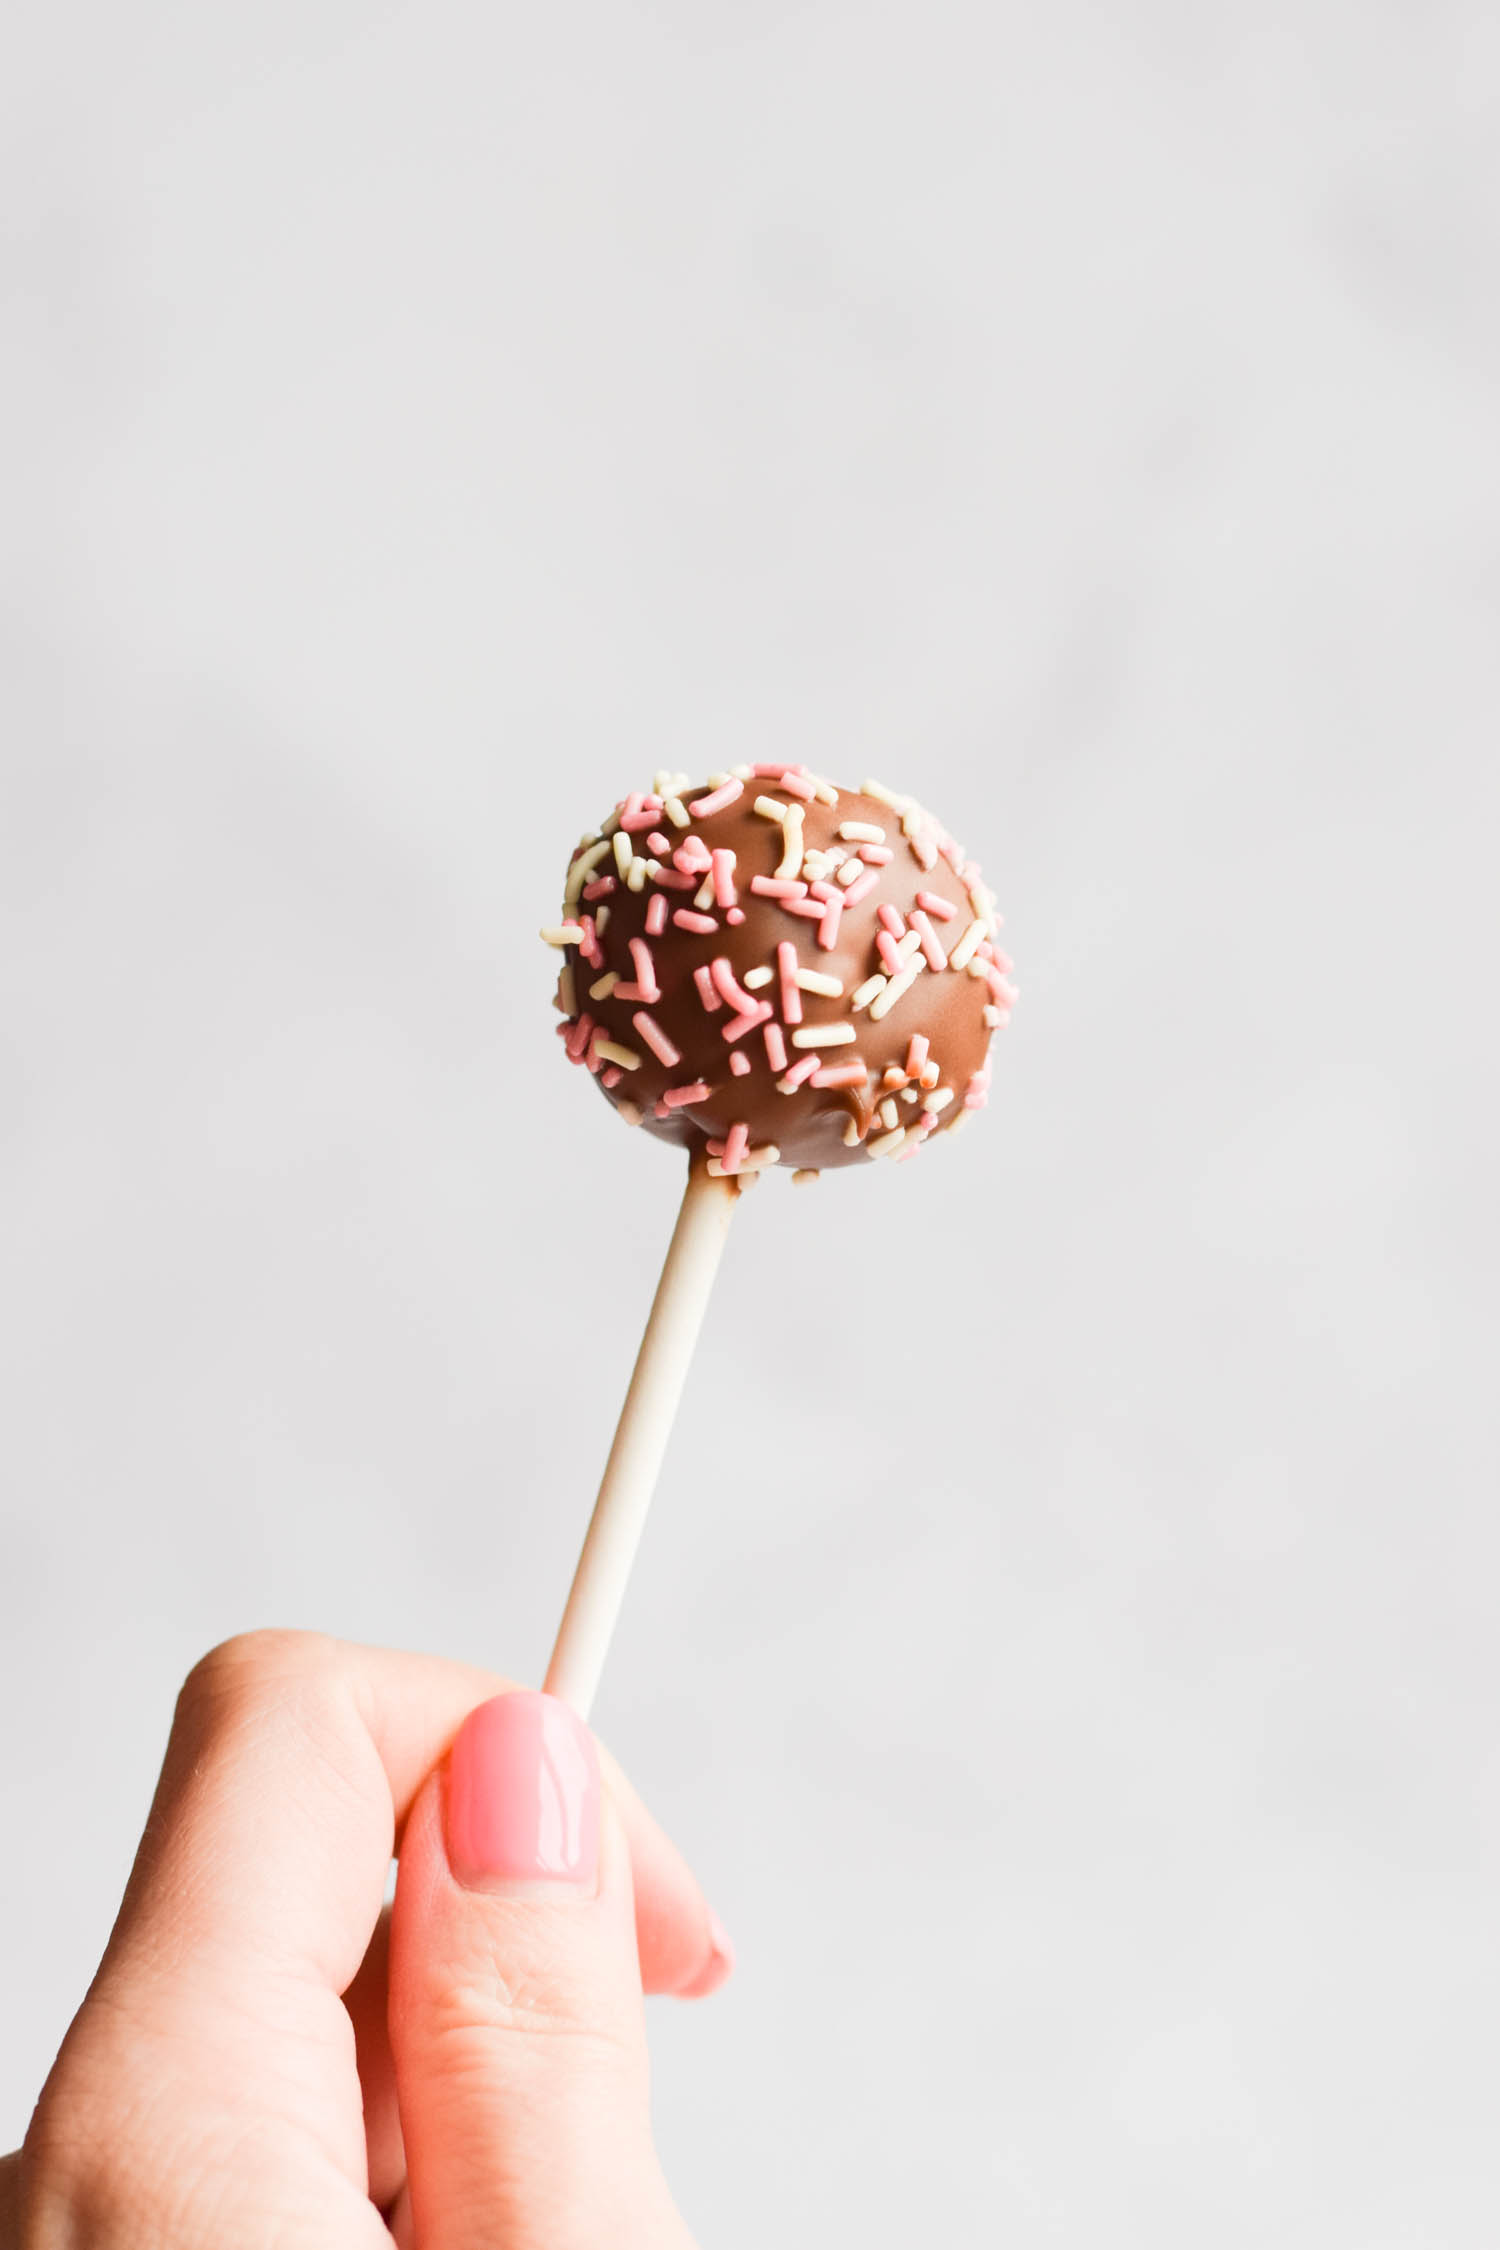 A gluten-free cake pop with chocolate and sprinkles